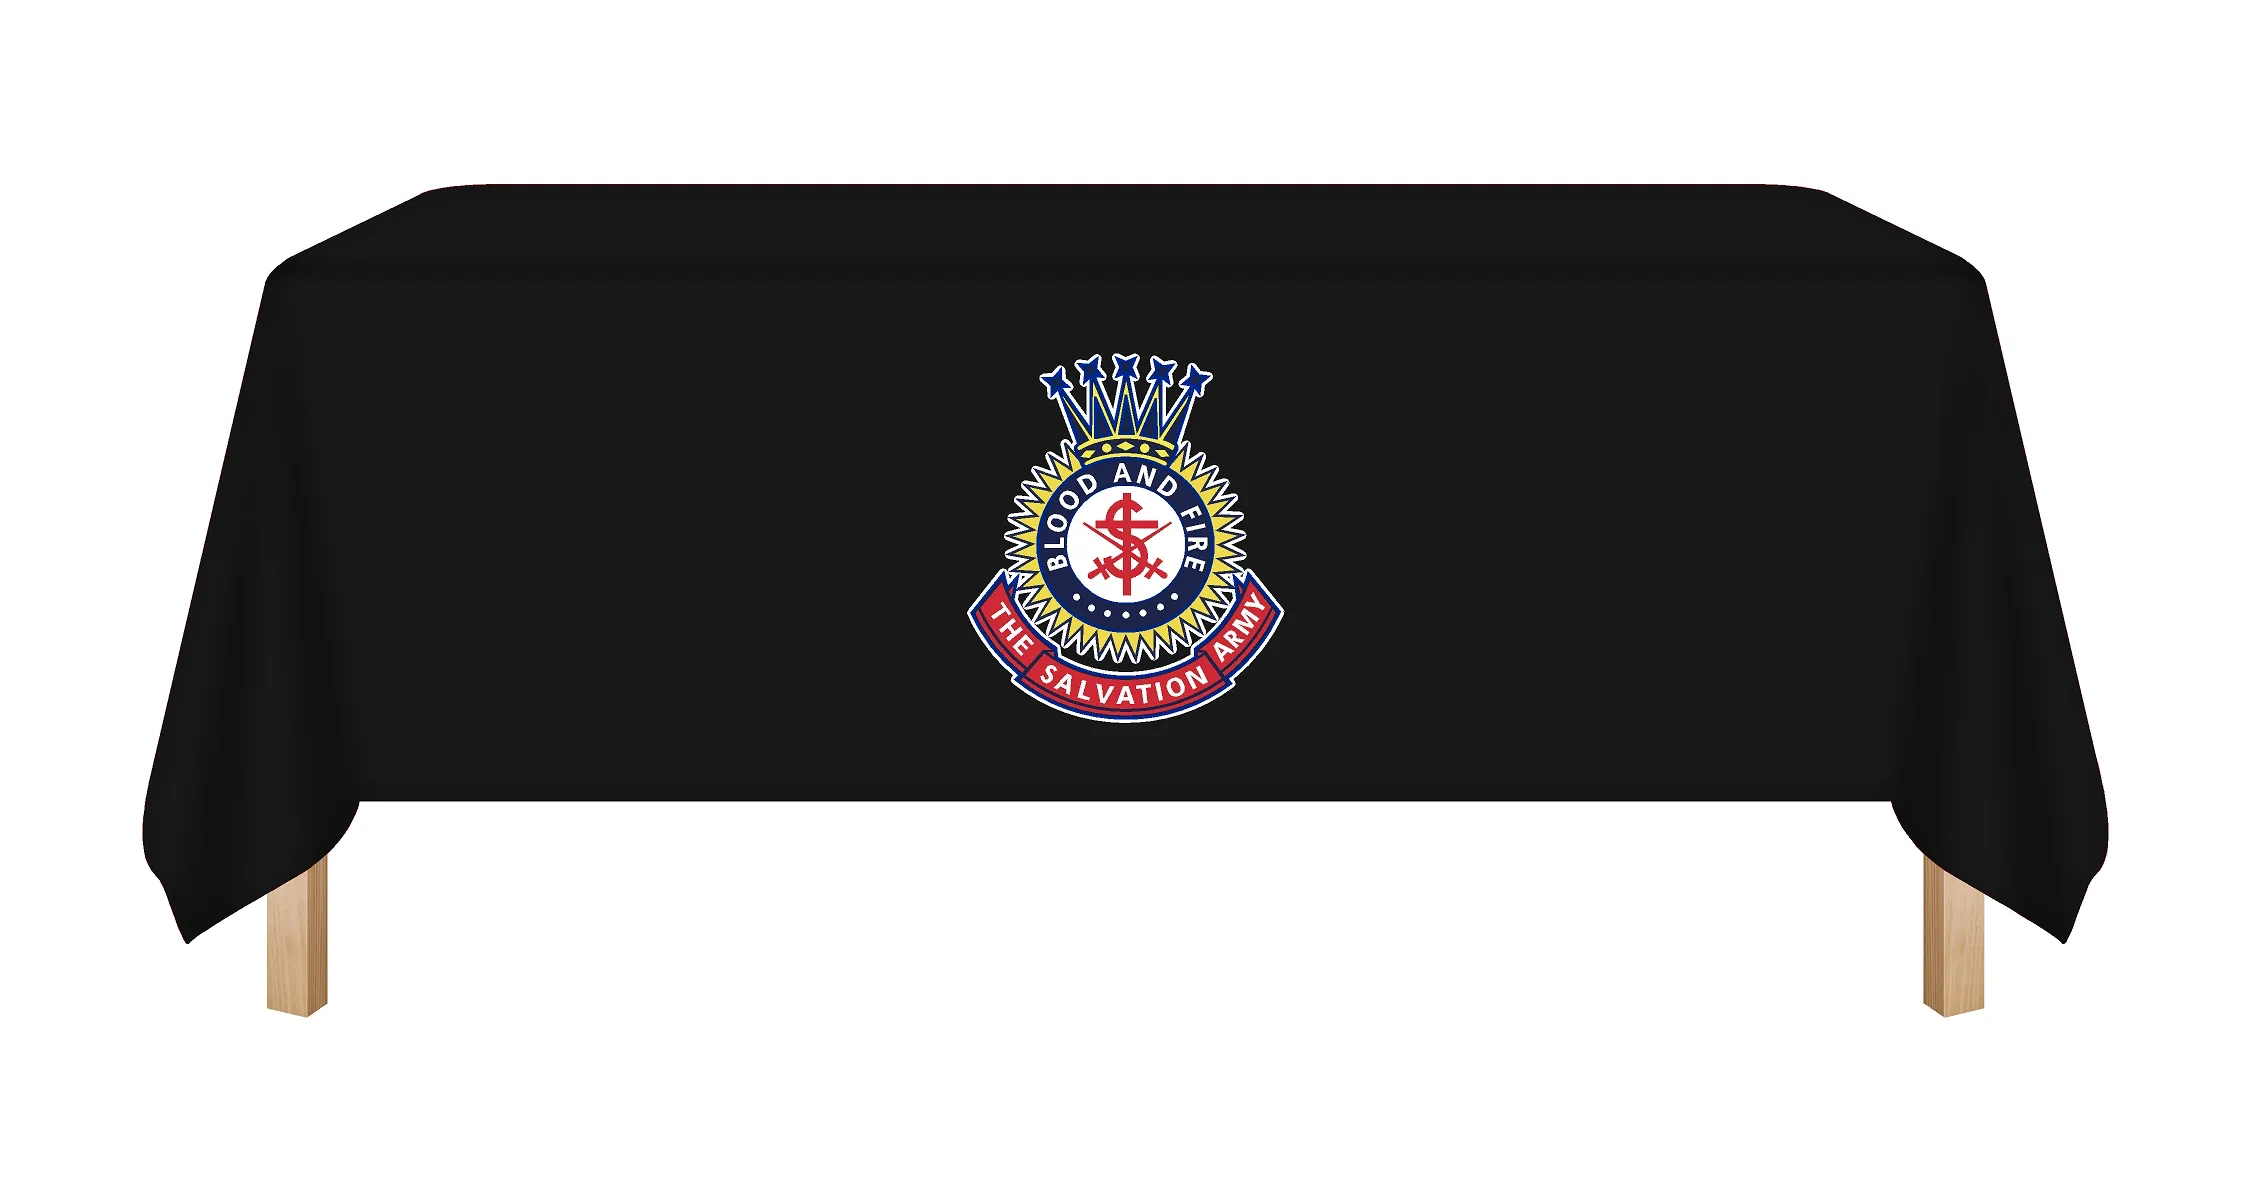 Black table cloth with Salvation Army Crest logo